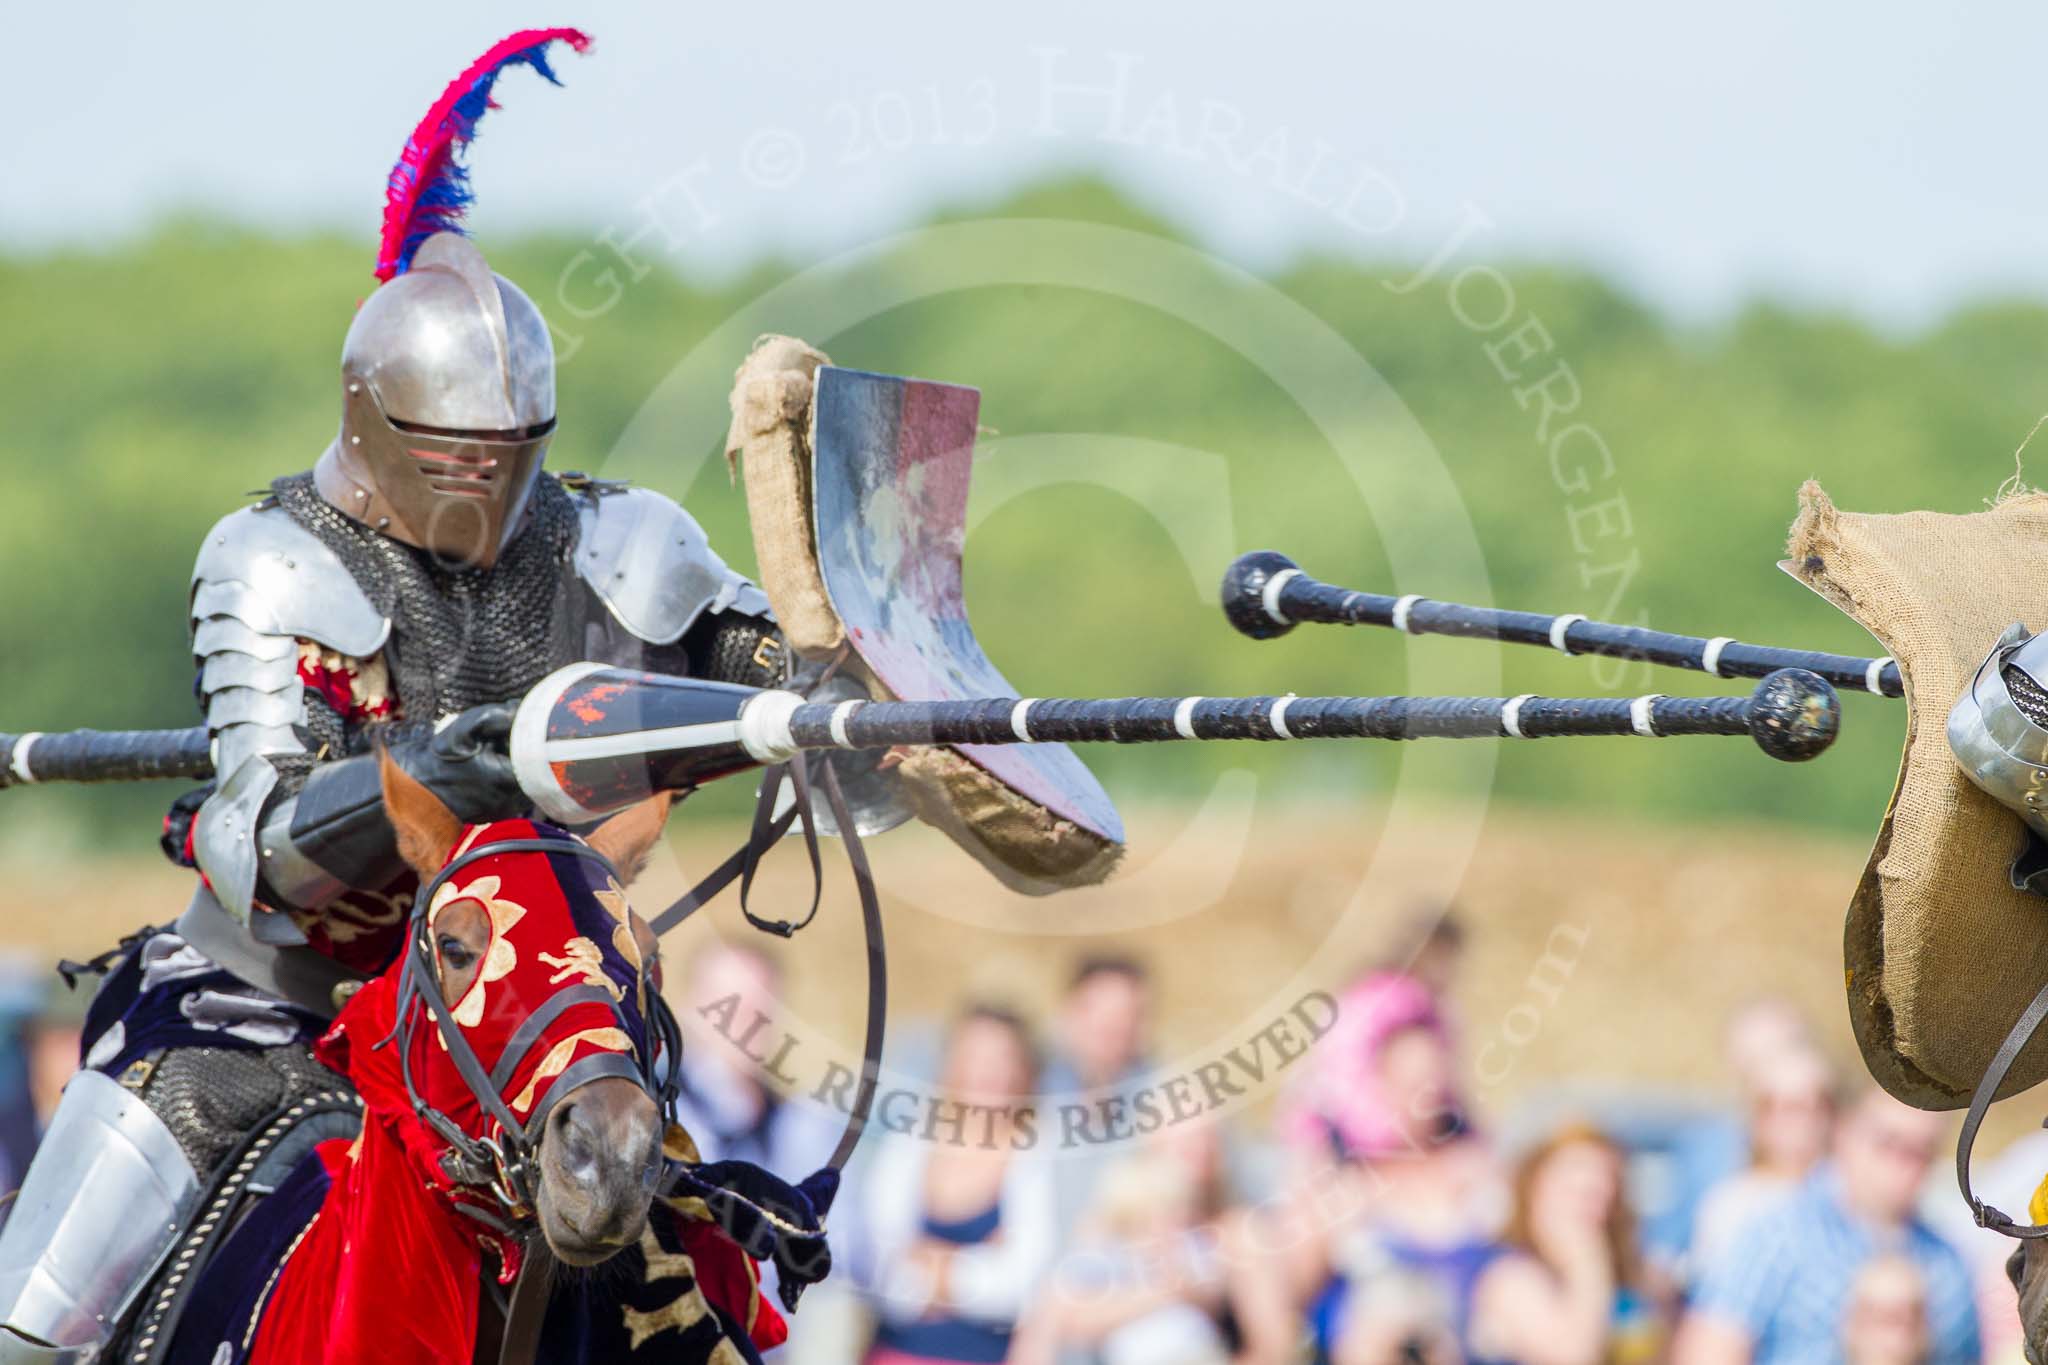 DBPC Polo in the Park 2013 - jousting display by the Knights of Middle England.
Dallas Burston Polo Club, ,
Southam,
Warwickshire,
United Kingdom,
on 01 September 2013 at 15:41, image #502